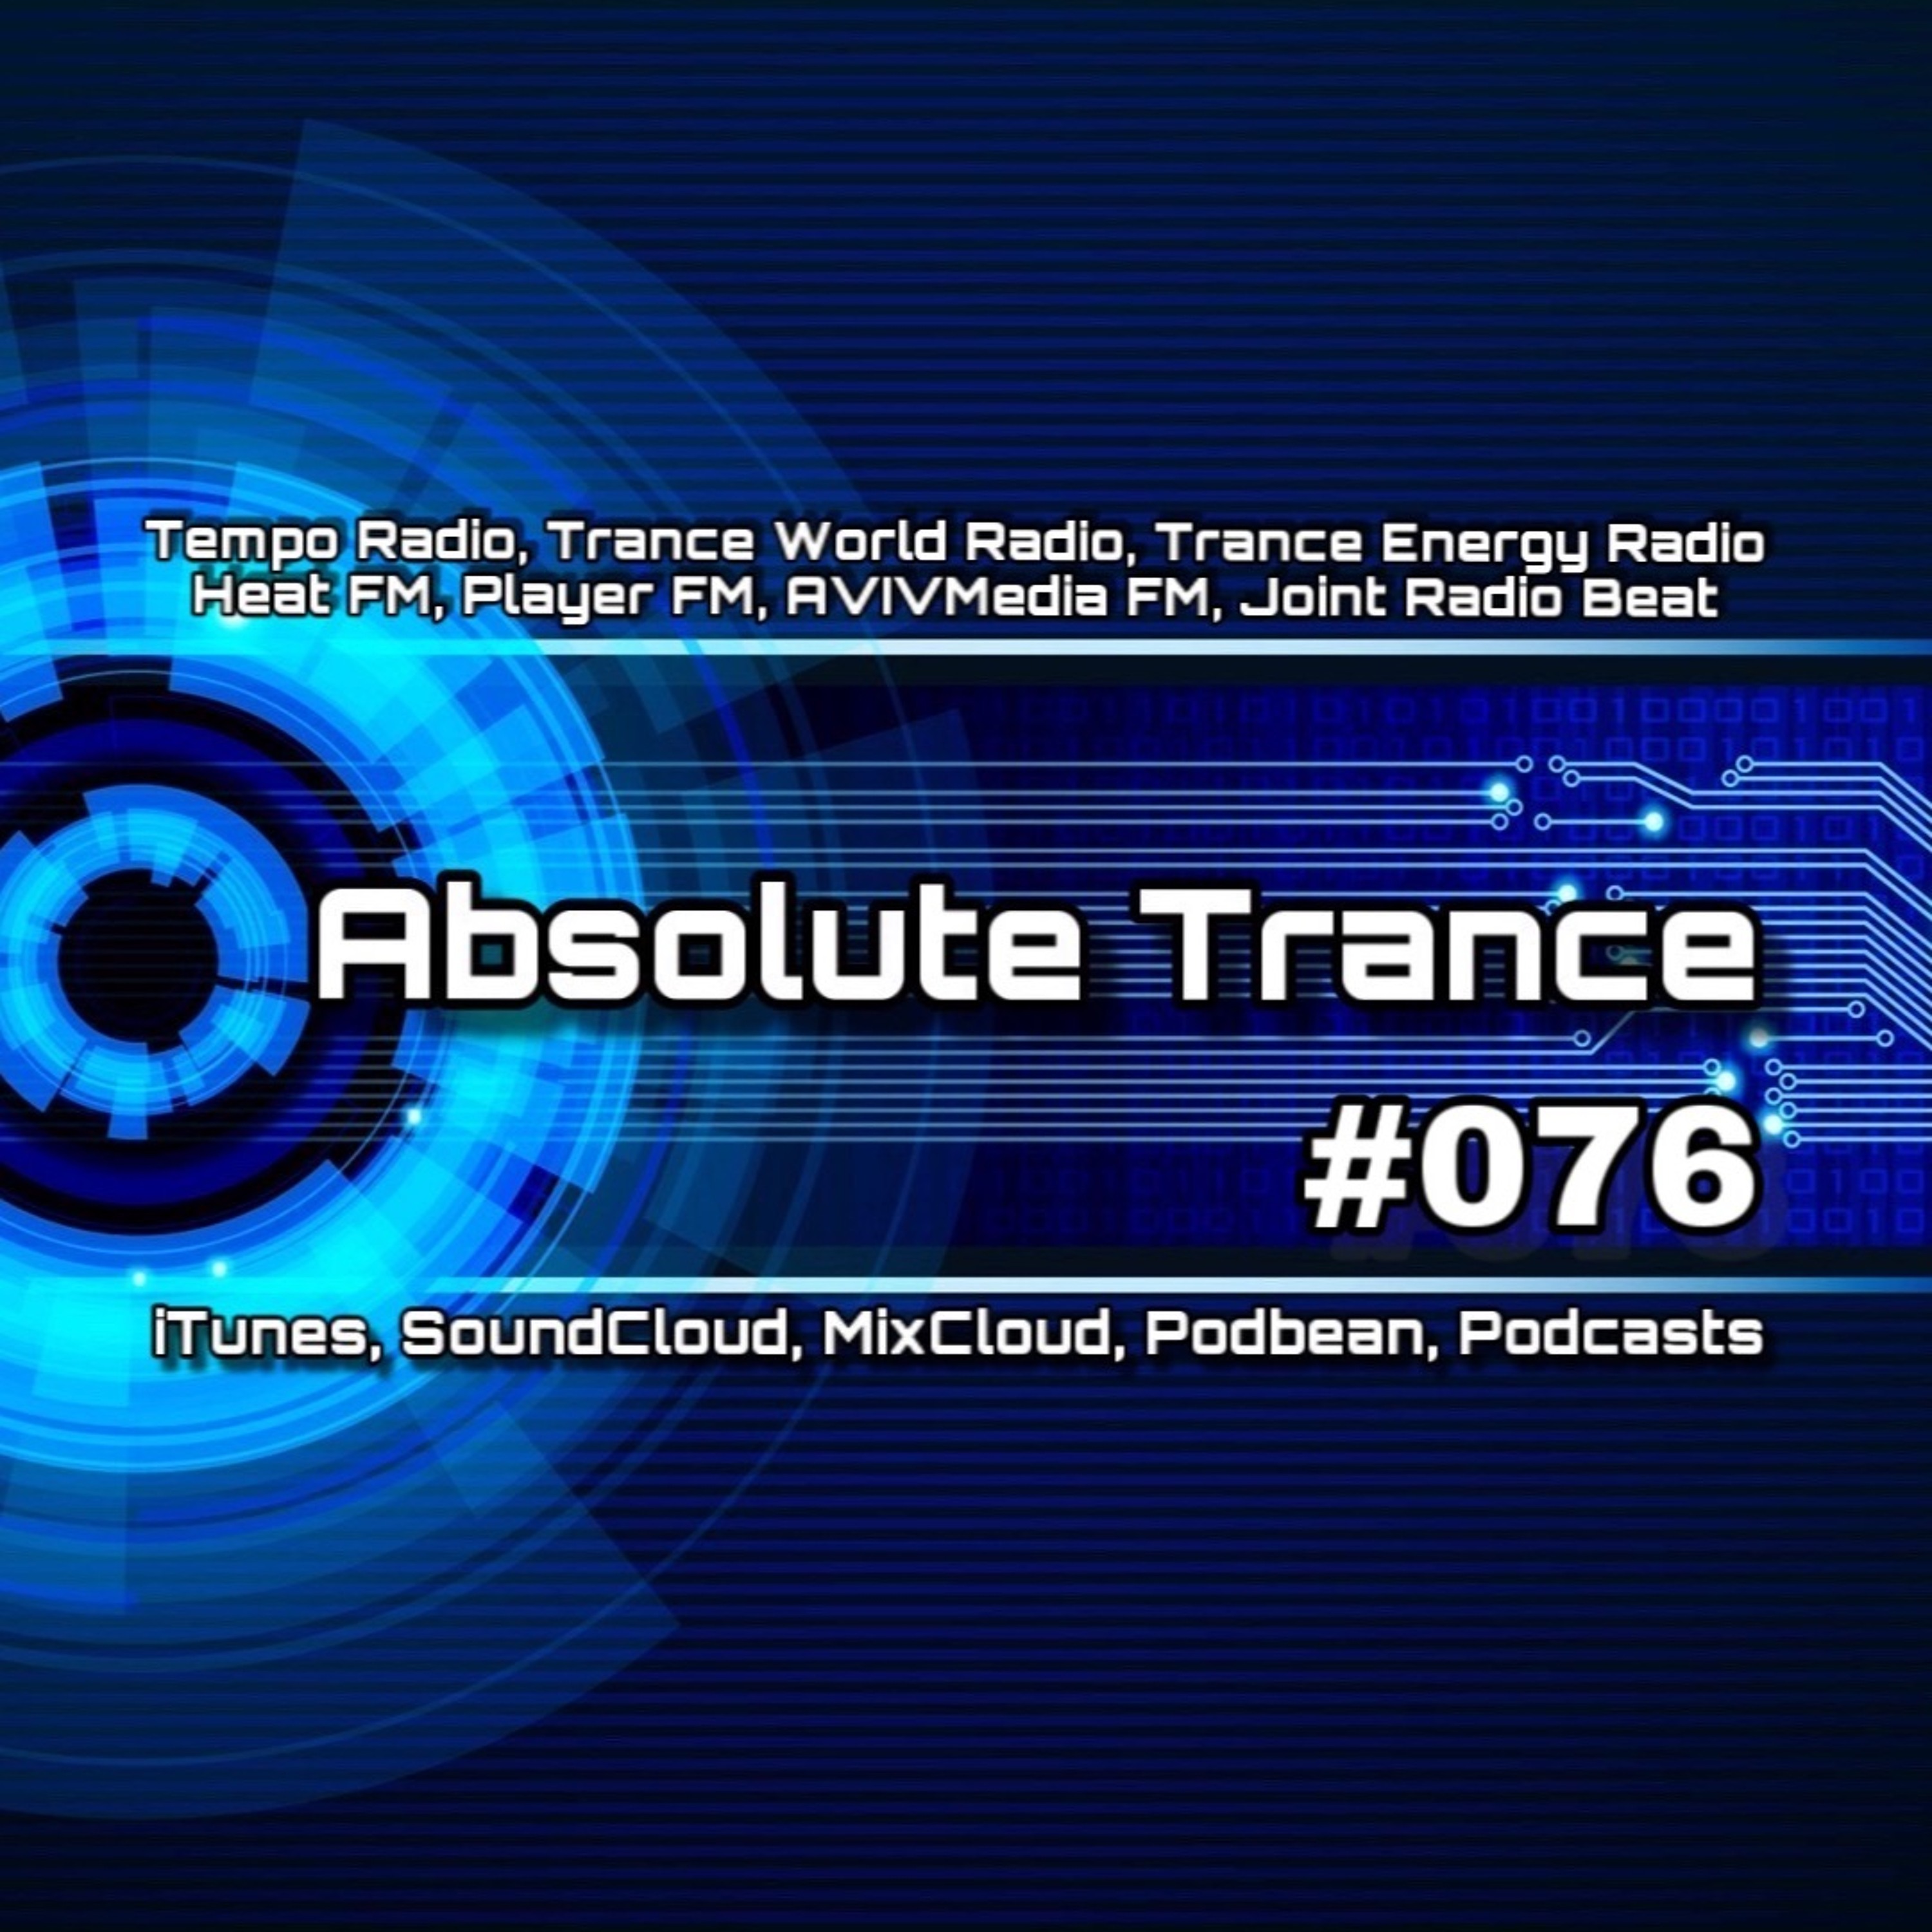 Absolute Trance #076